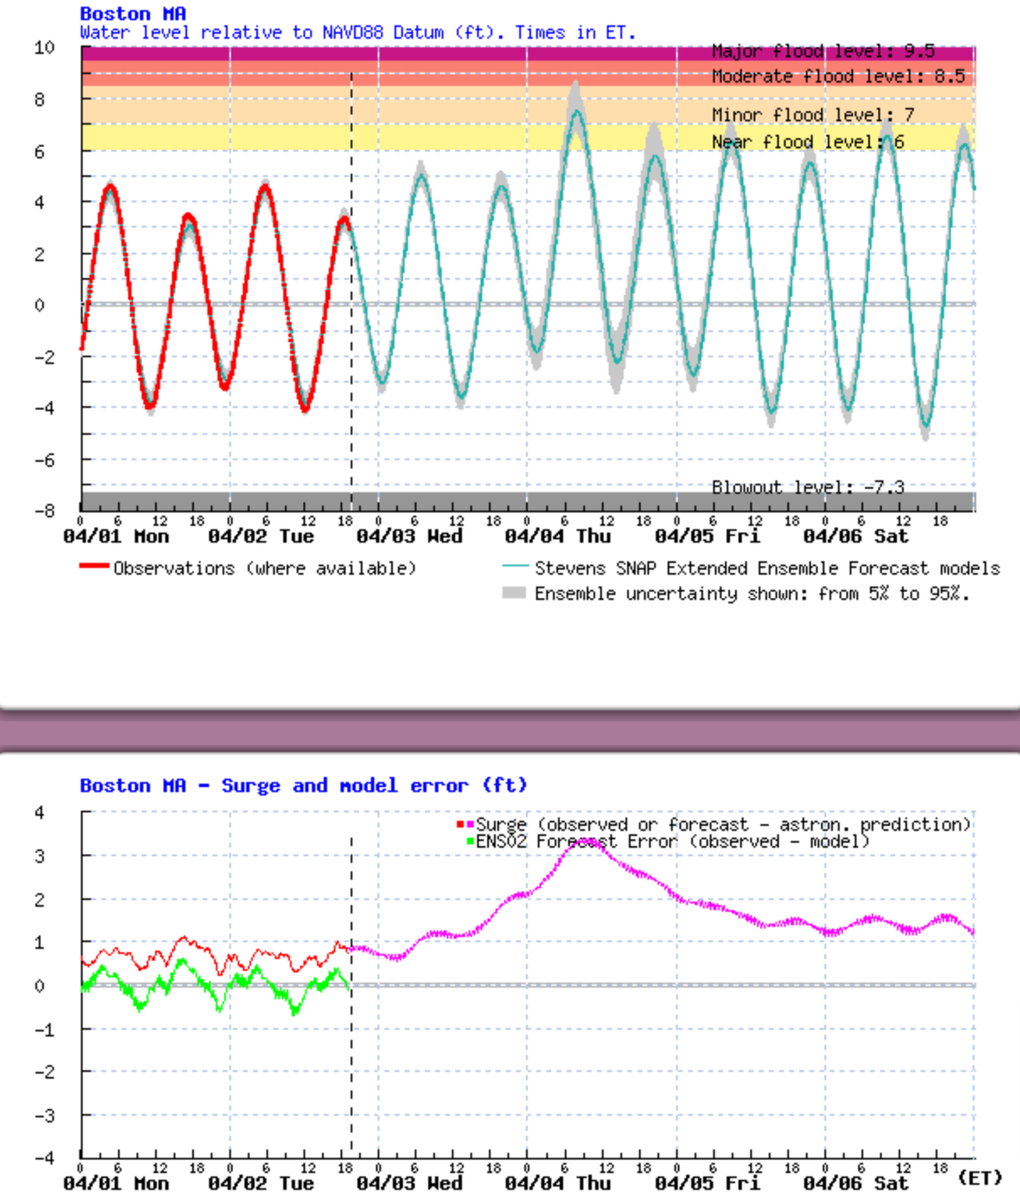 Tides are quite low (thankfully as this would be a serious mess otherwise) but even so... strong, long duration onshore flow + deepening storm is going to cause some coastal flooding issues. Surge guidance pushing 3+ feet Thu AM tide. @NWSBoston has posted a Coastal Flood Watch